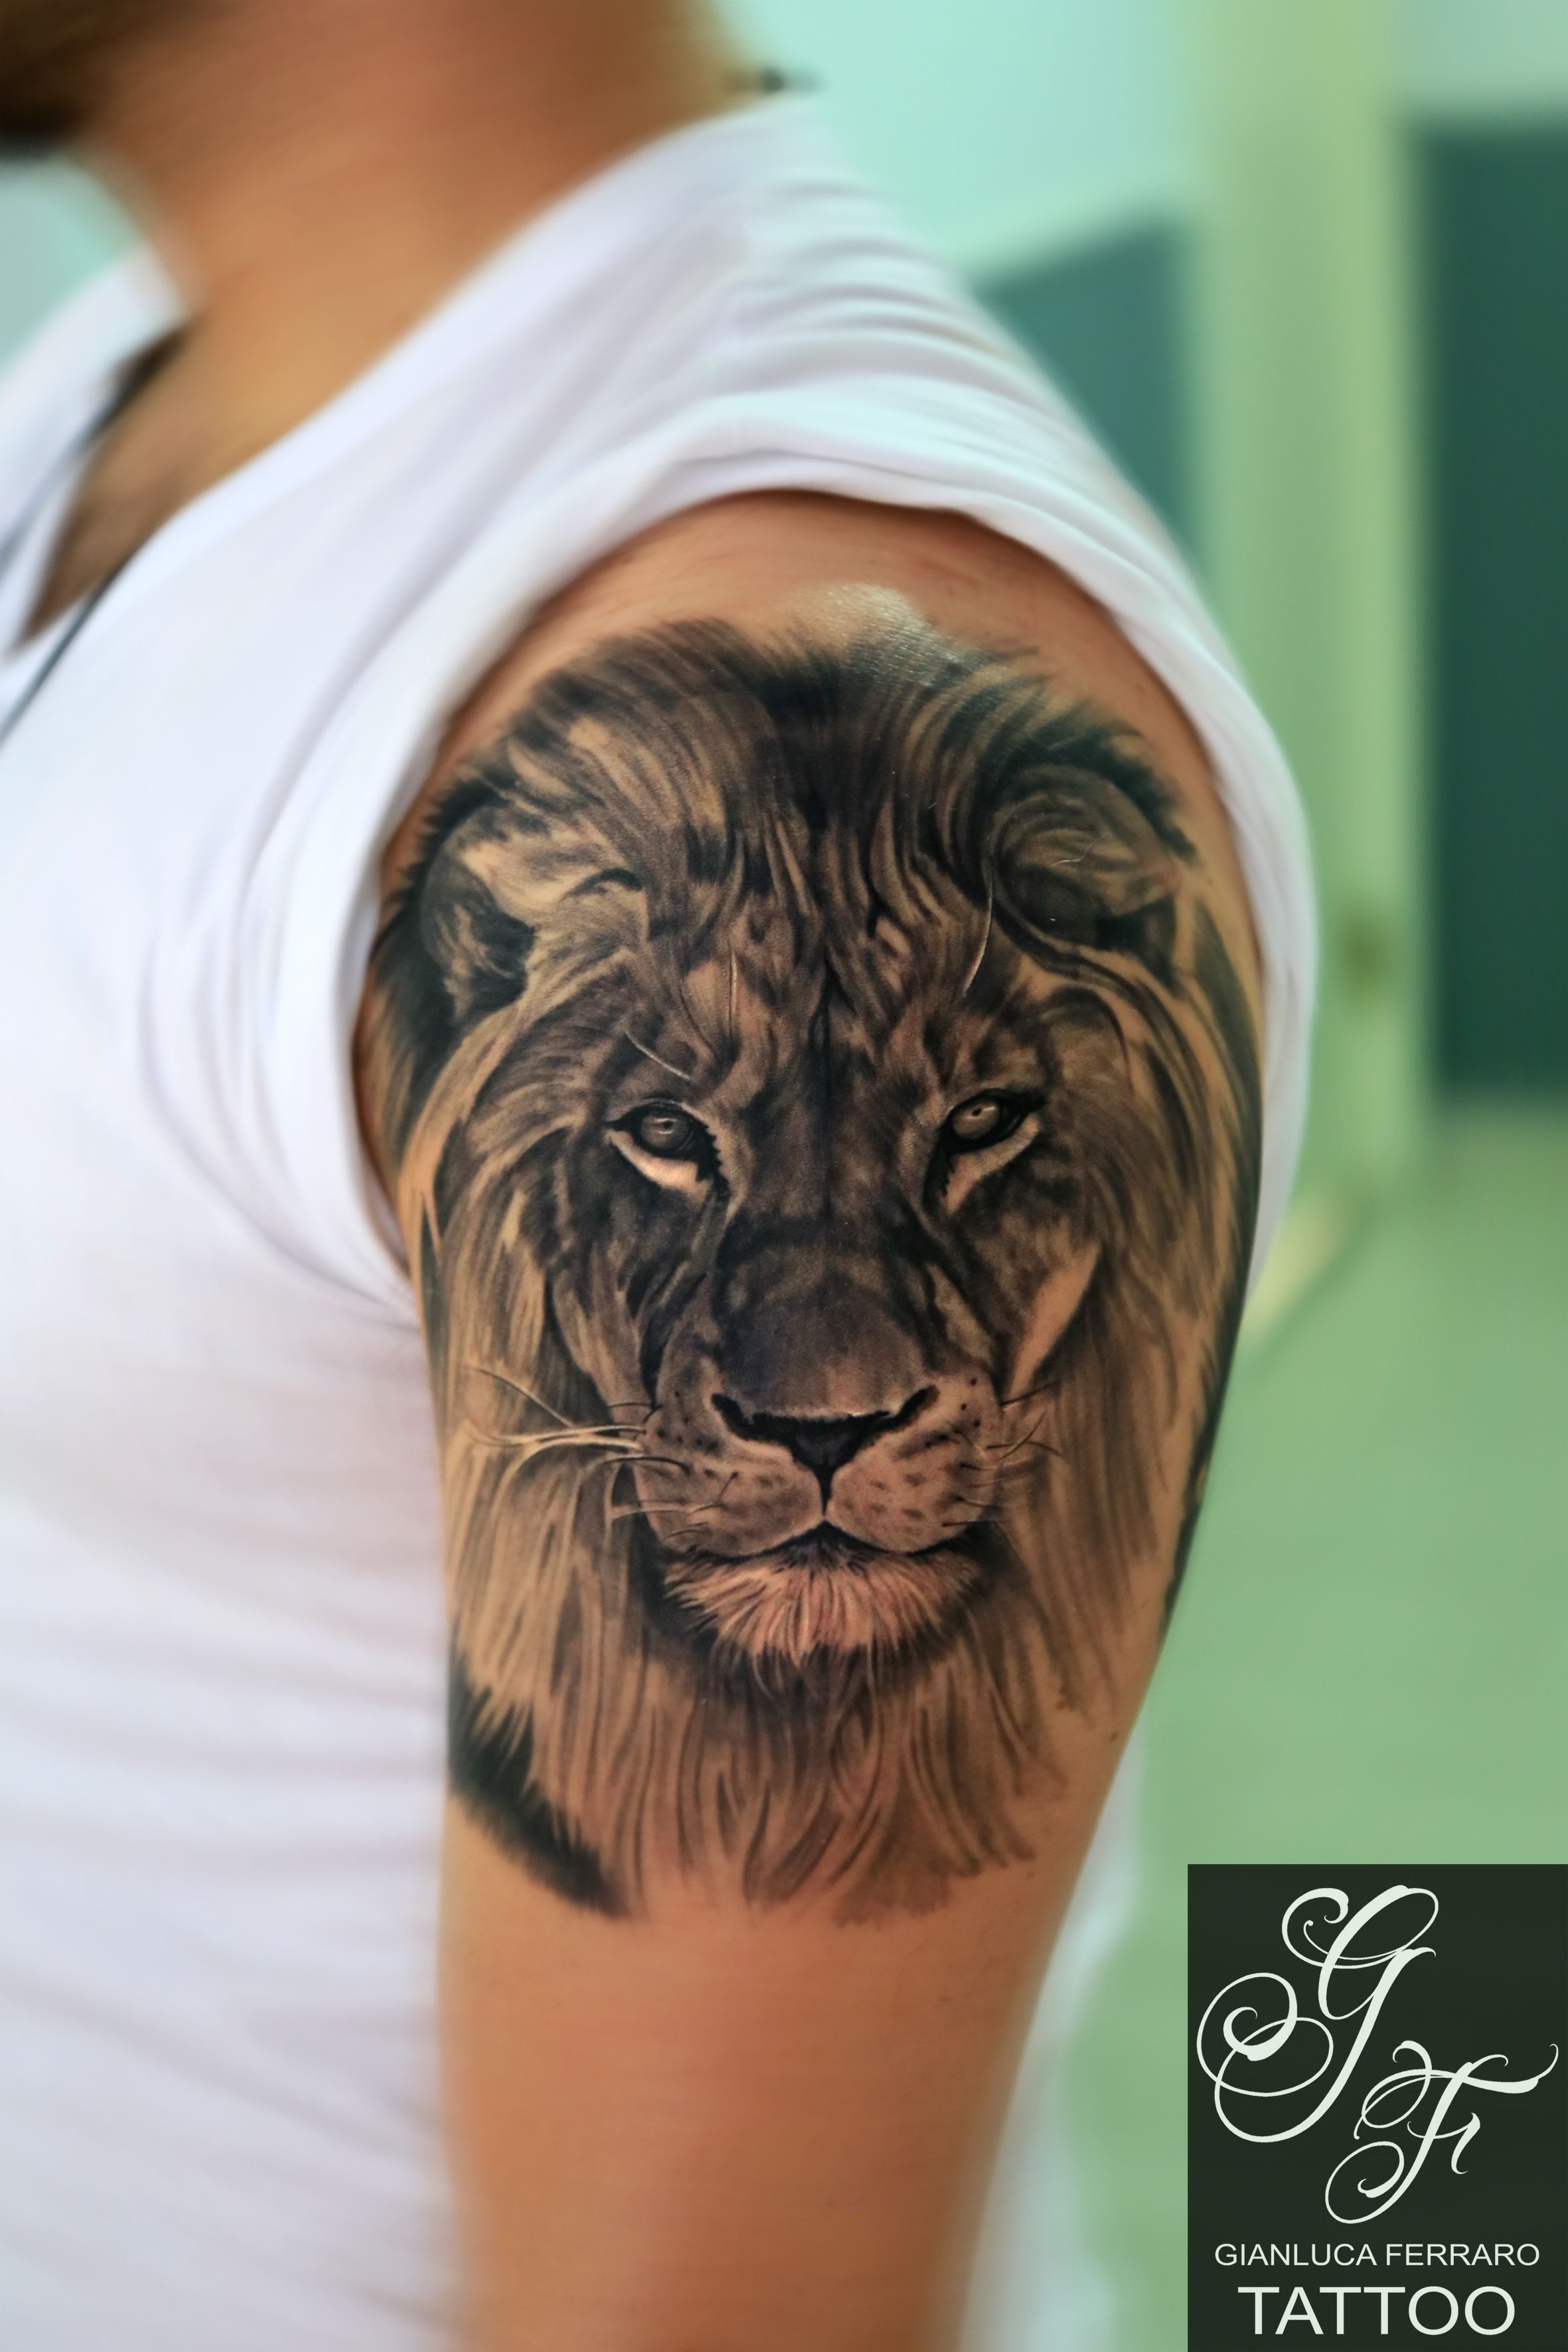 Tattoos Tattoos Lion Head Tattoos Lion Tattoo Tattoos with regard to dimensions 2362 X 3543